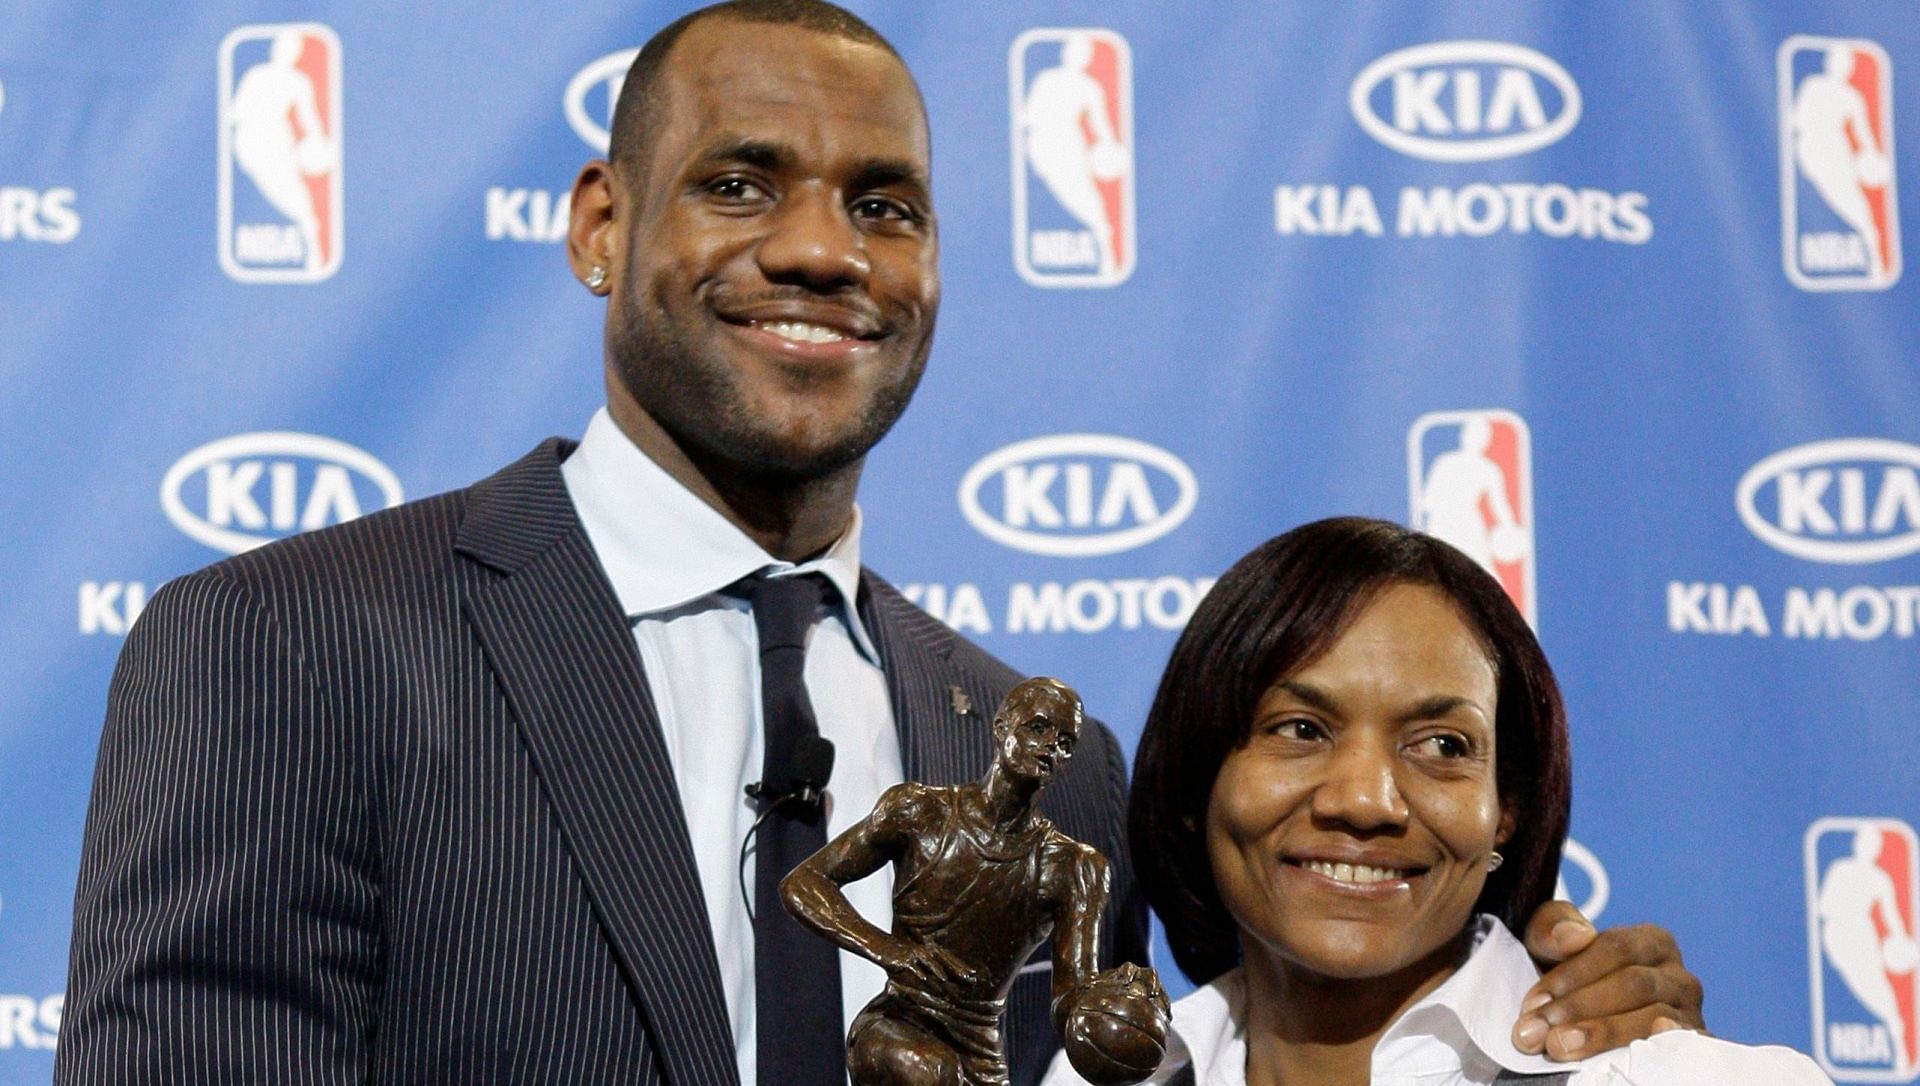 LeBron with his mother Gloria James [Source USA Today]